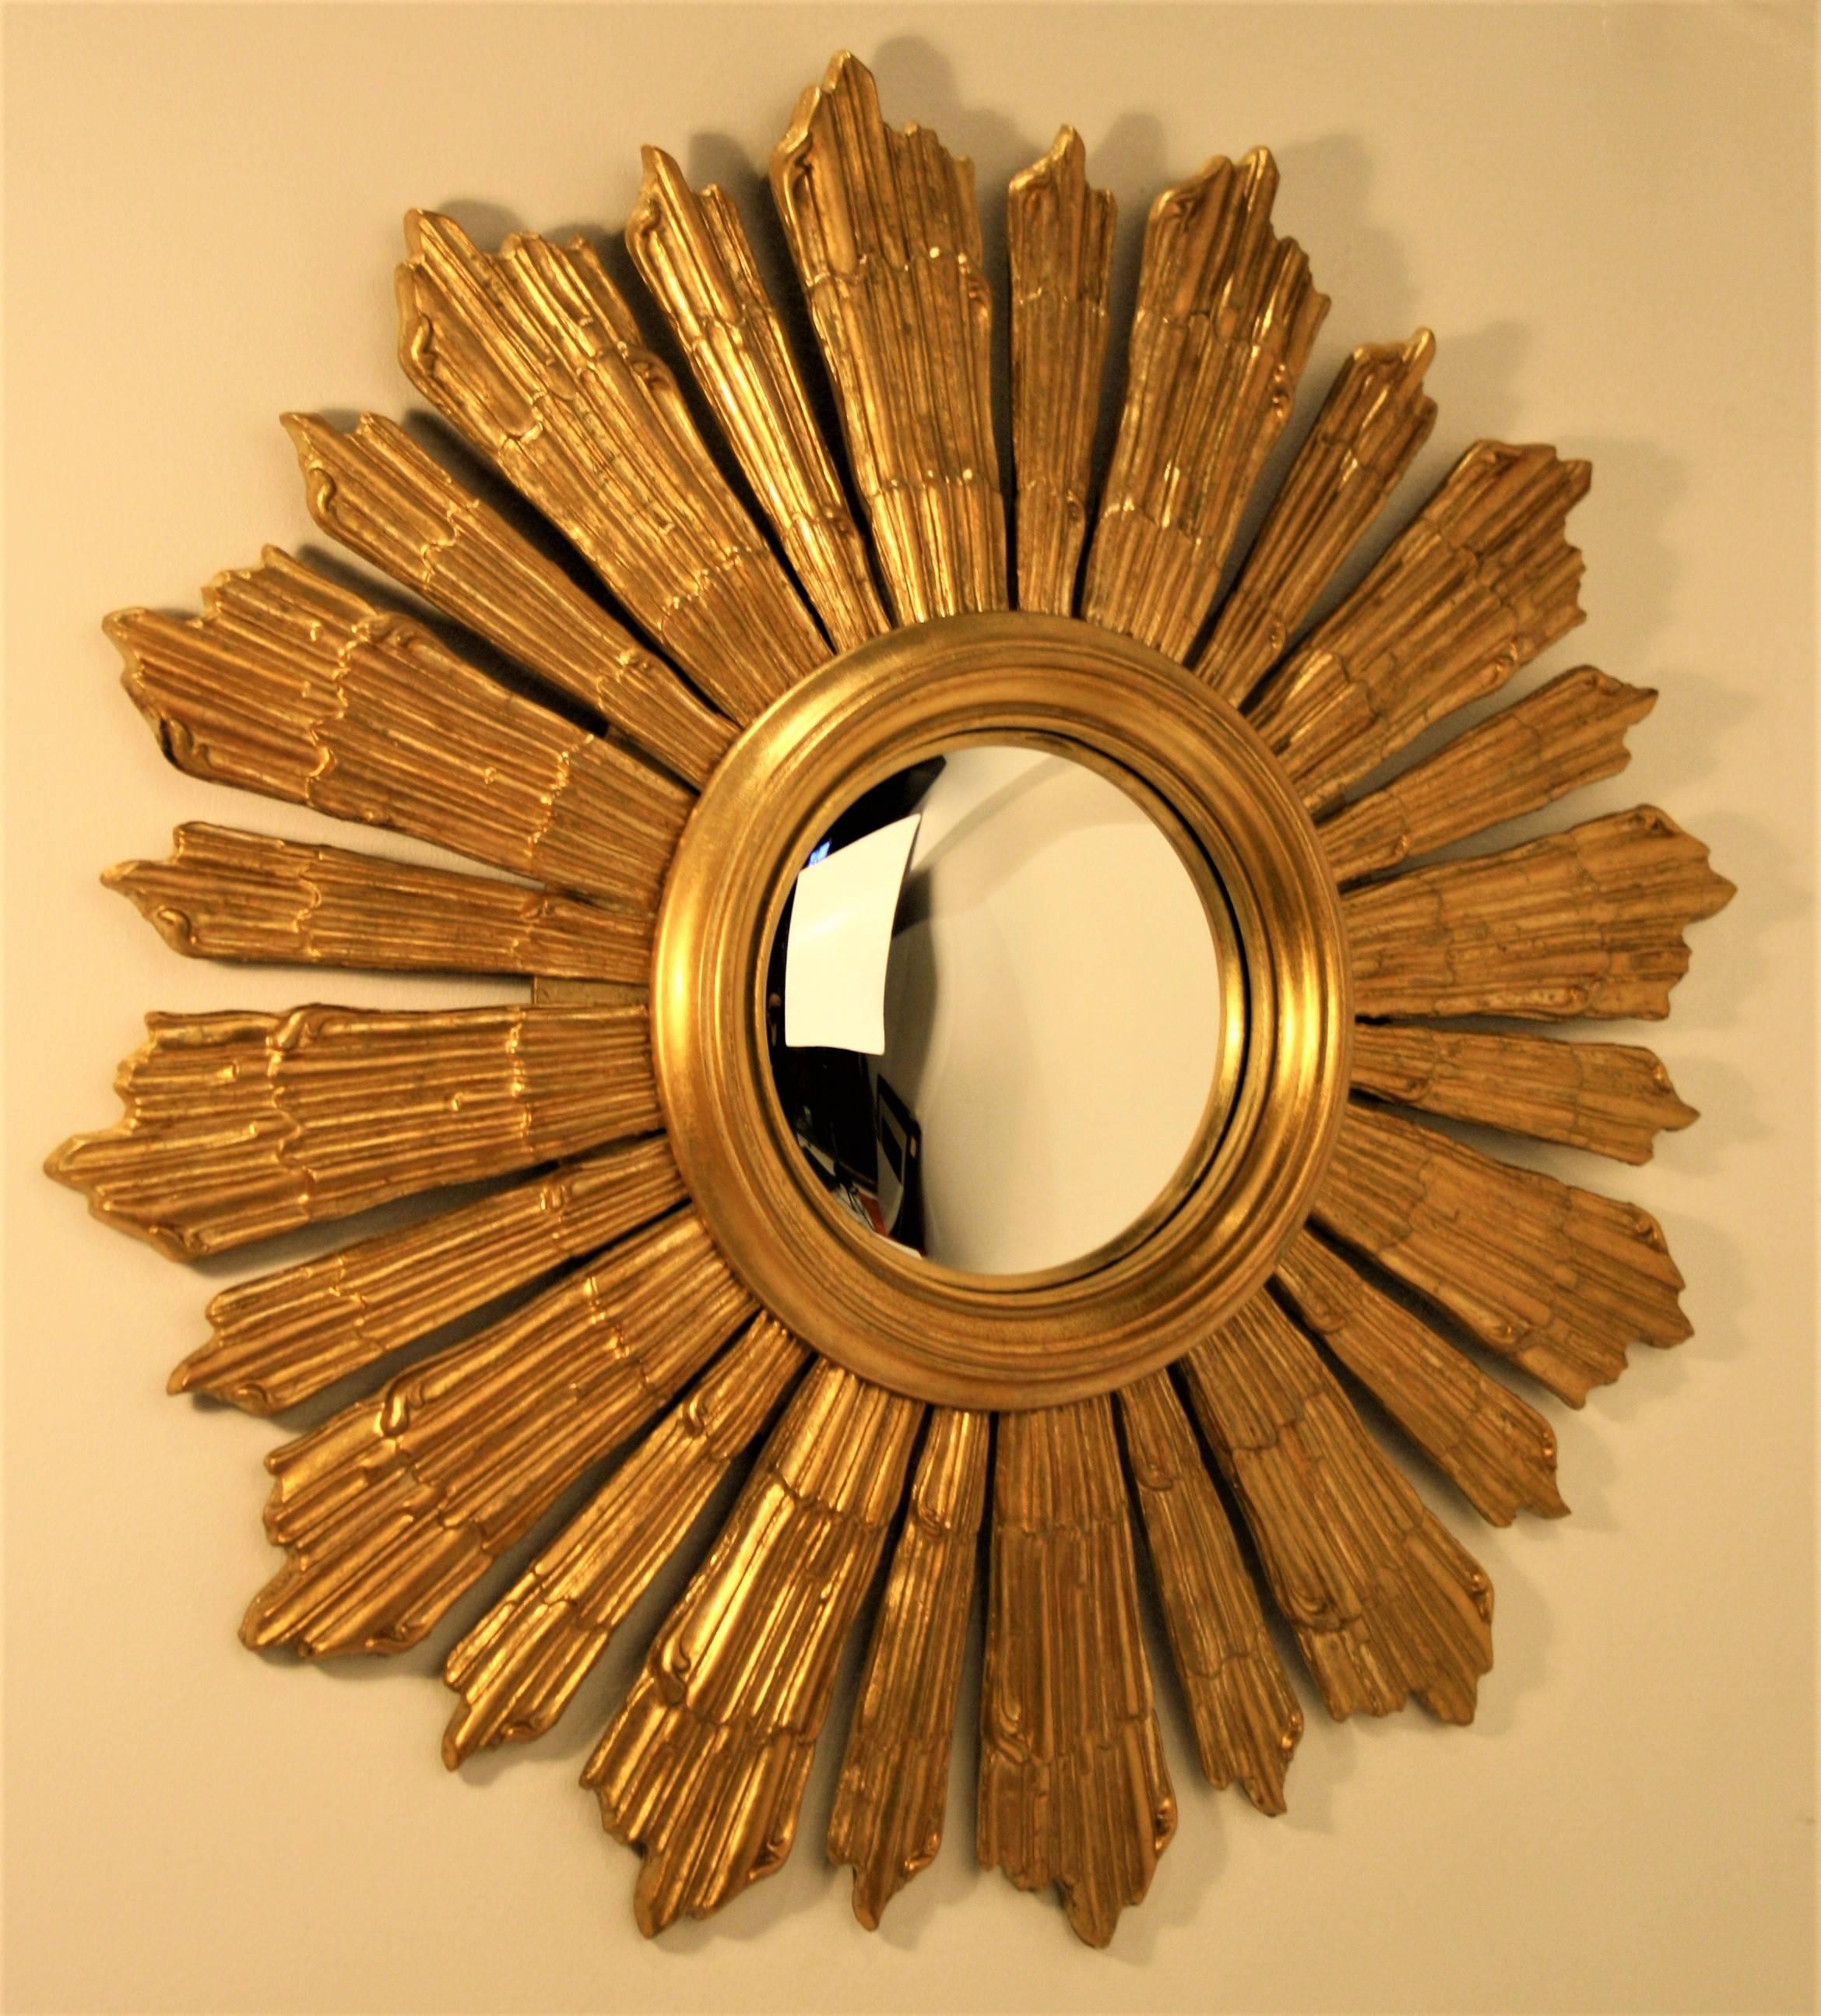 A beautiful French giltwood sunburst mirror with a convex glass mirror from 1940s.